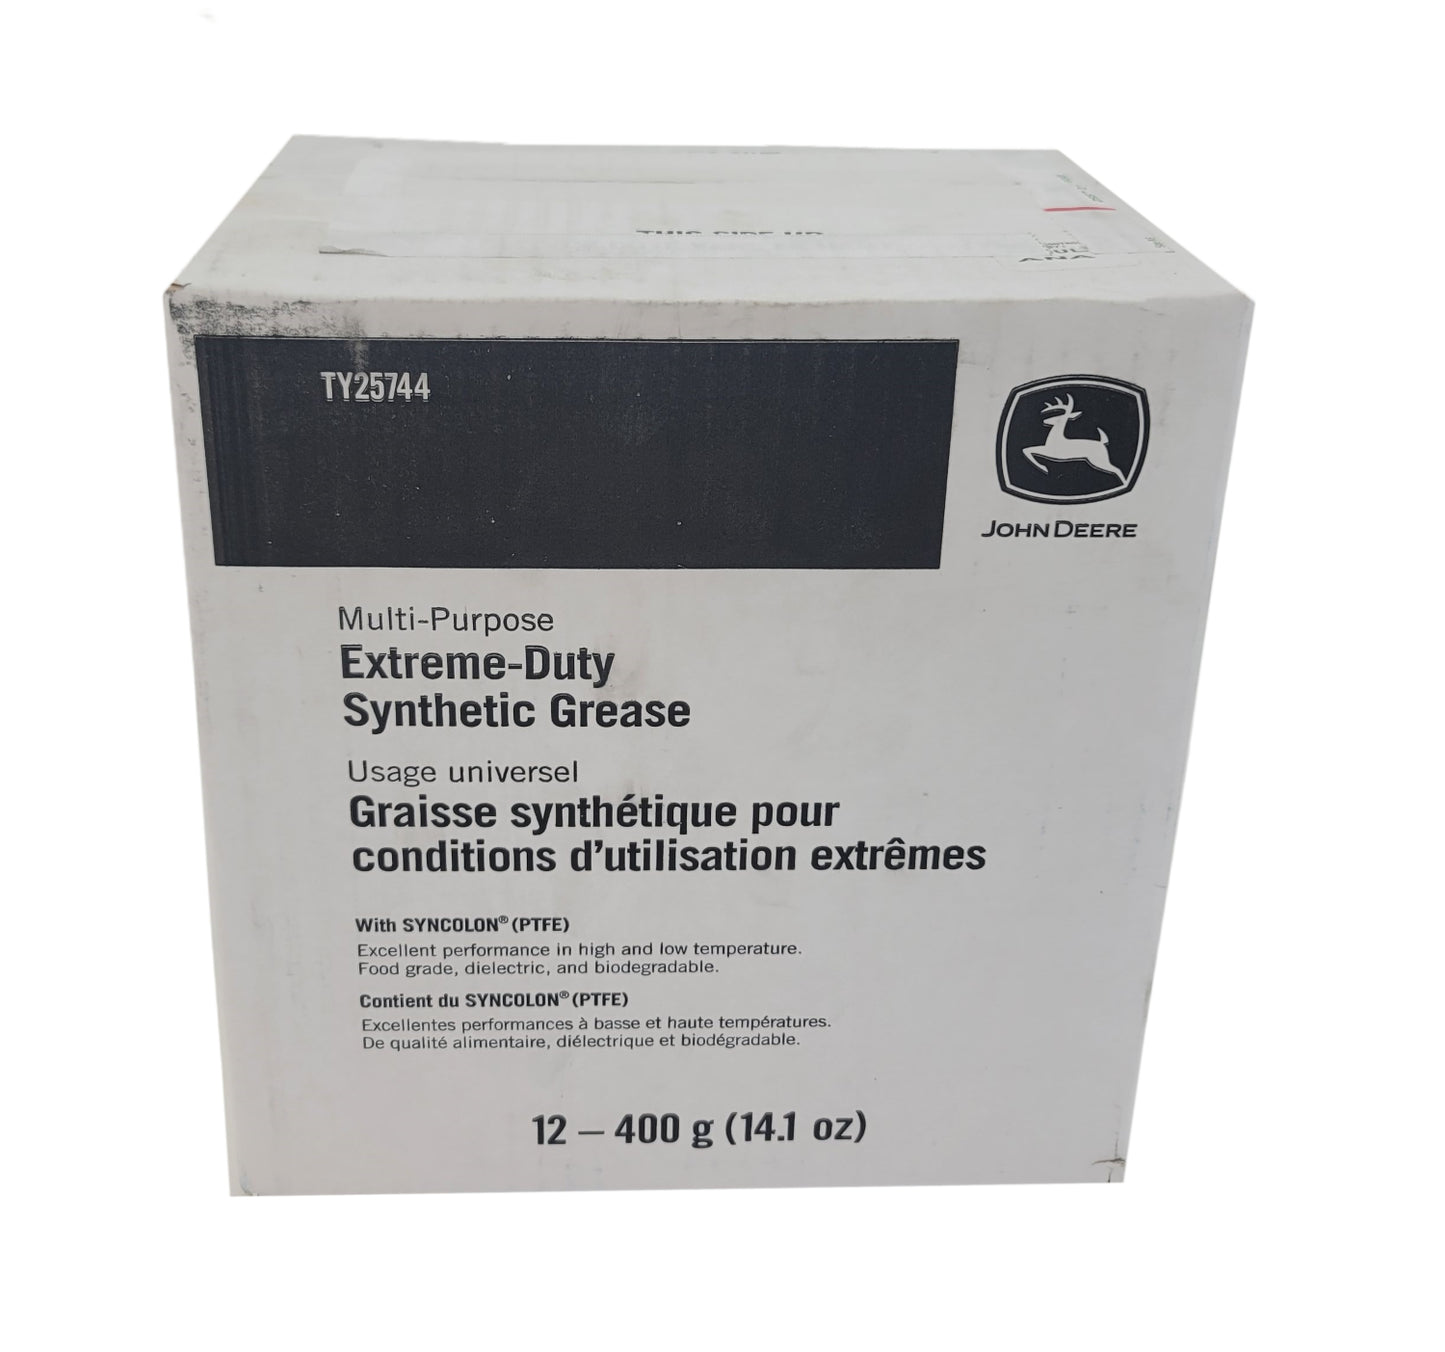 John Deere Original Equipment (12 PACK) Extreme-Duty Synthetic Grease - TY25744